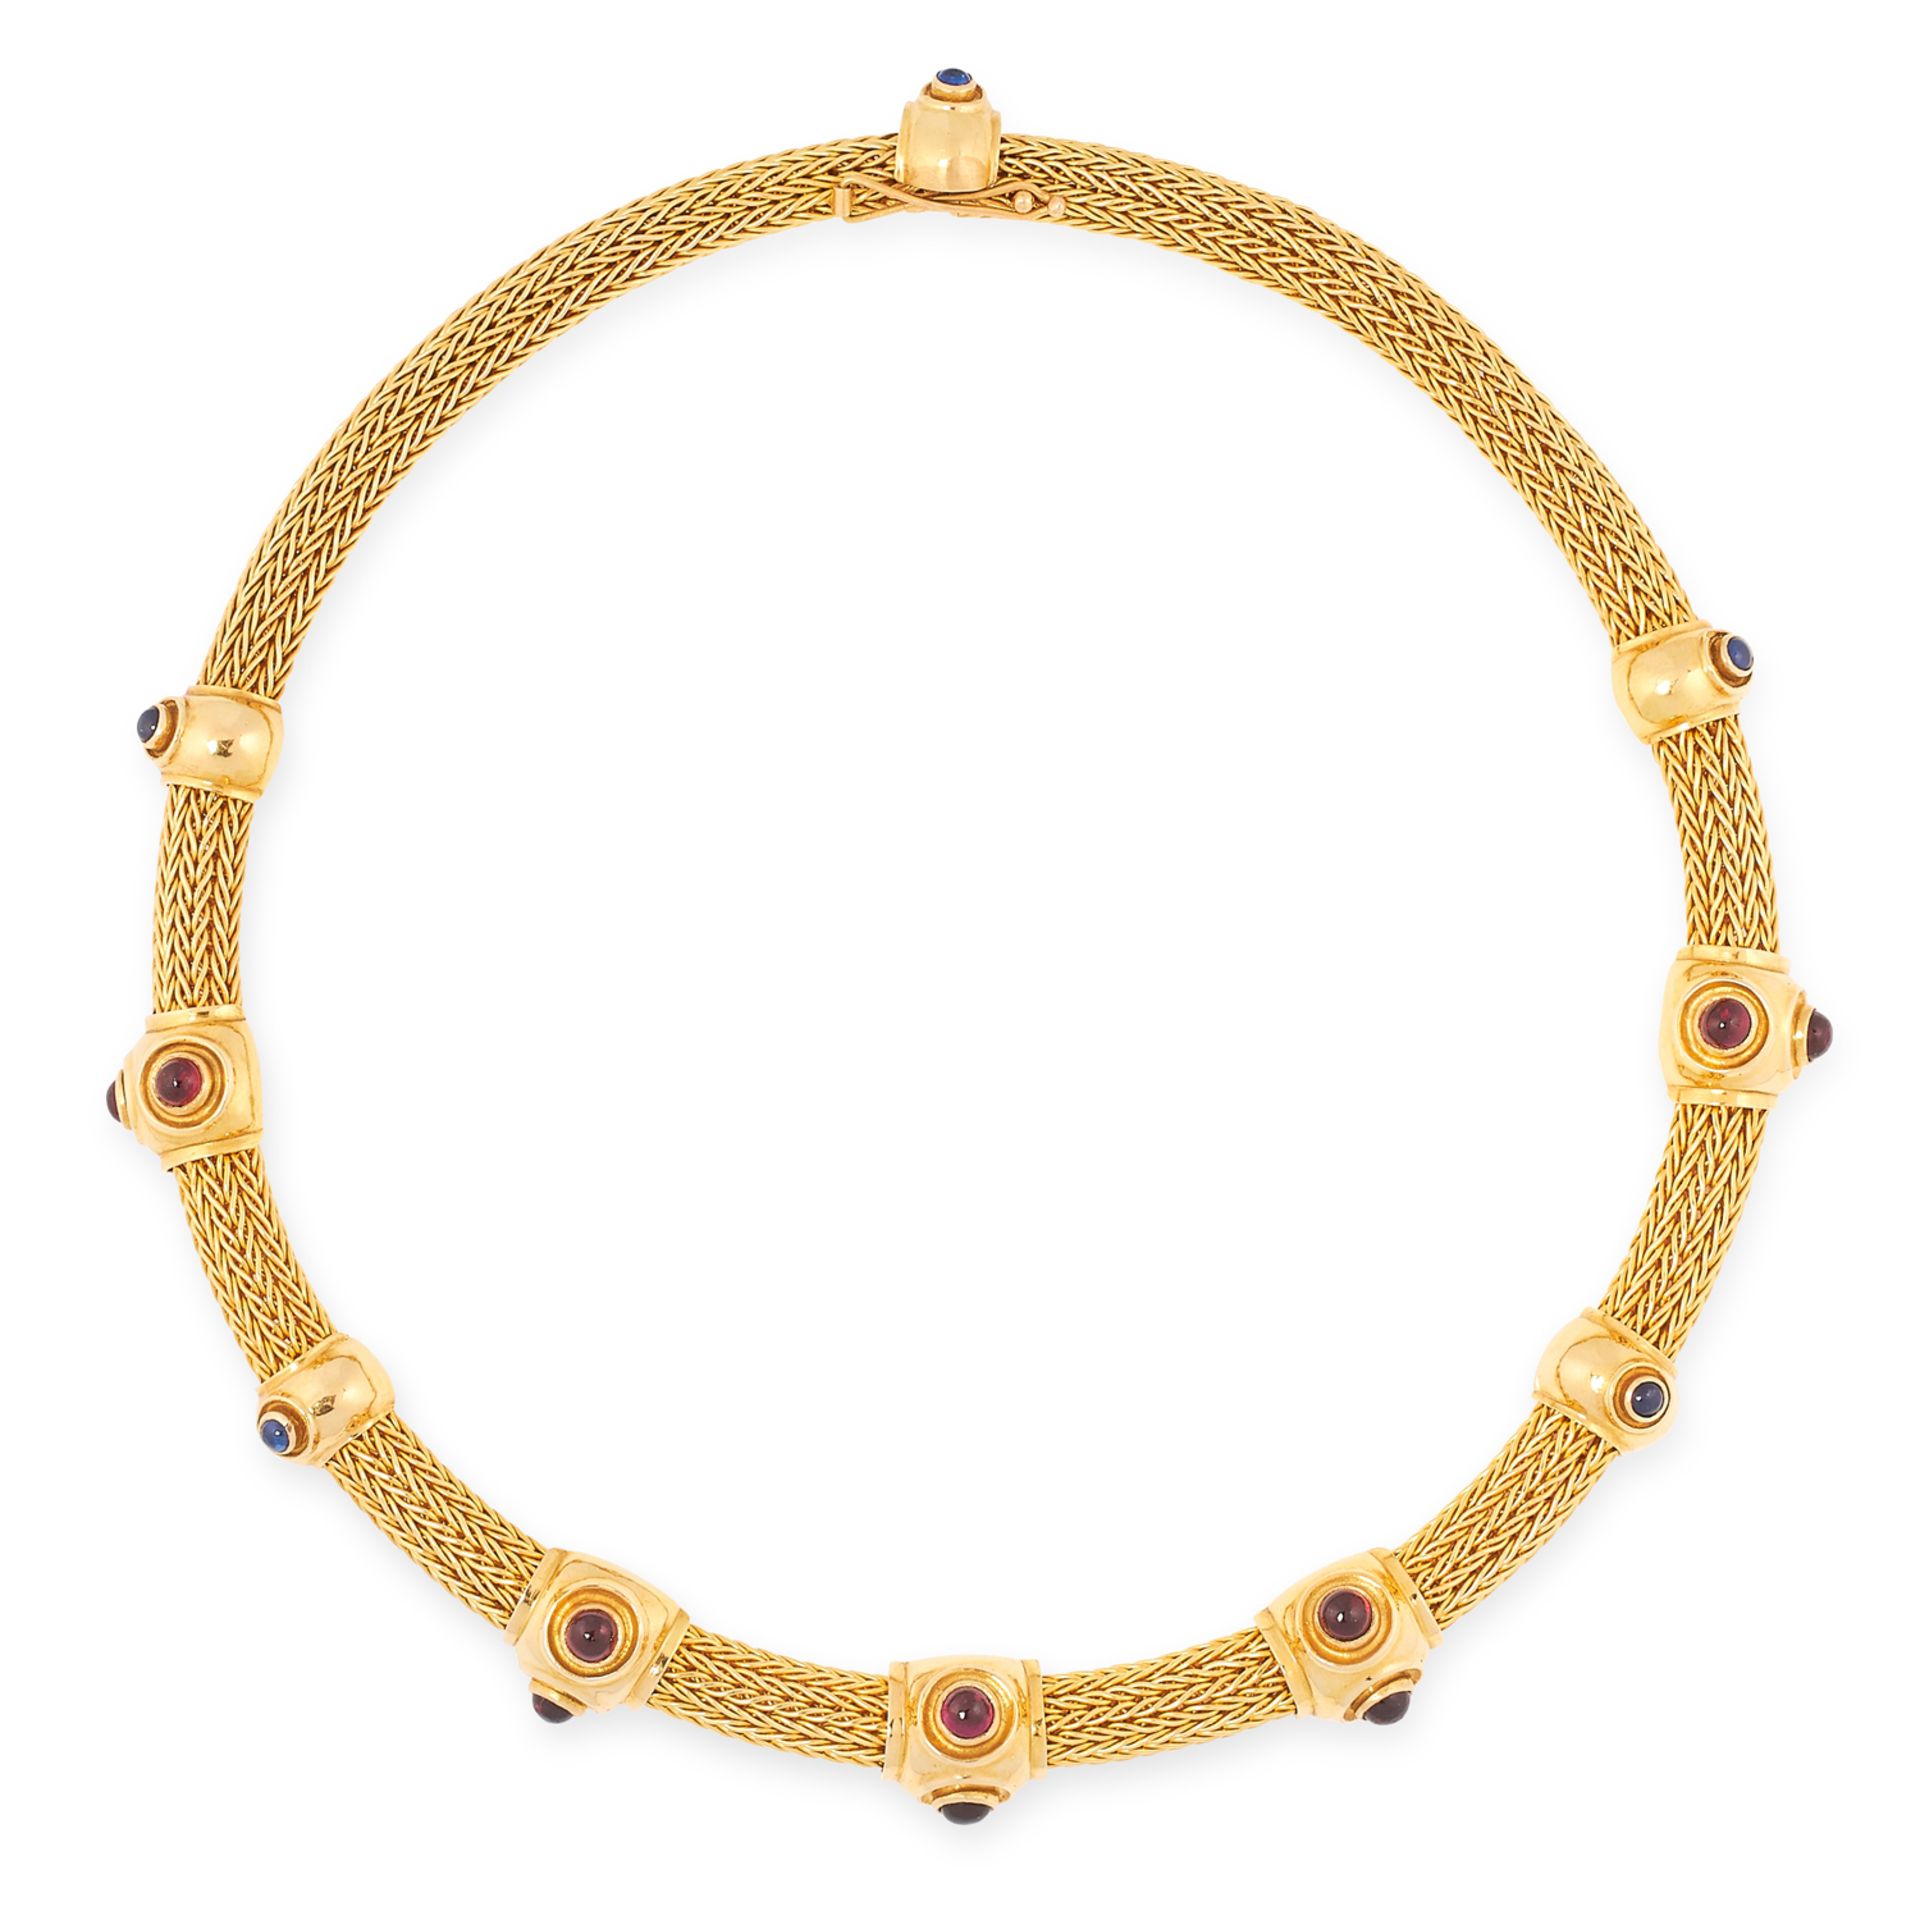 A GEMSET TORQUE NECKLACE, ILIAS LALAOUNIS in 18ct yellow gold, comprising of an interwoven pipe